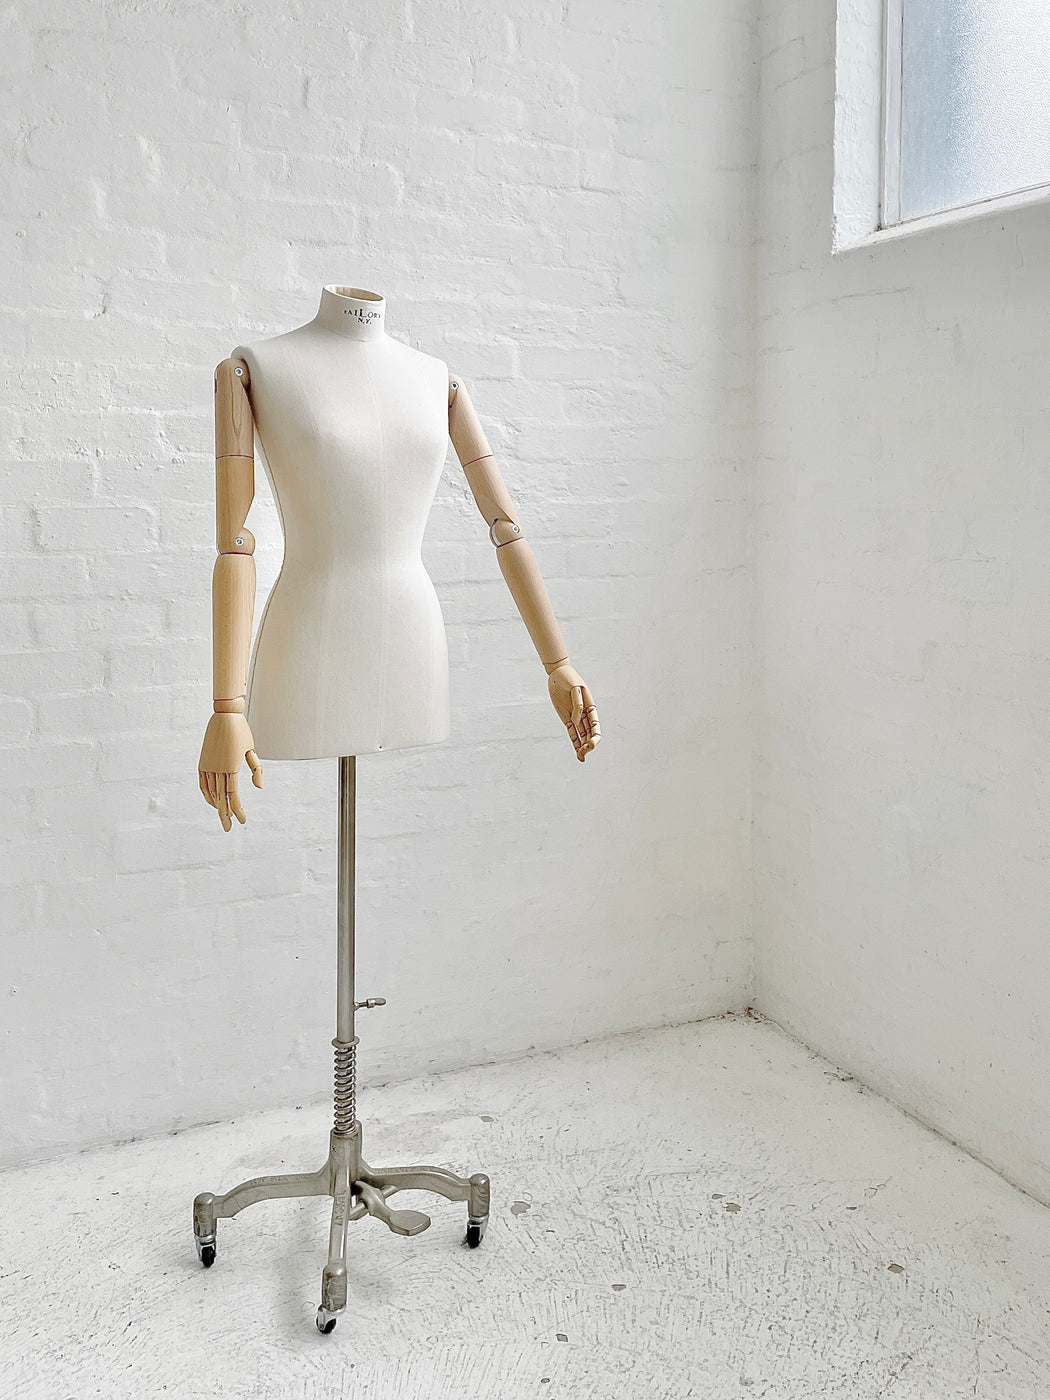 Italian Made Dress-makers Mannequin